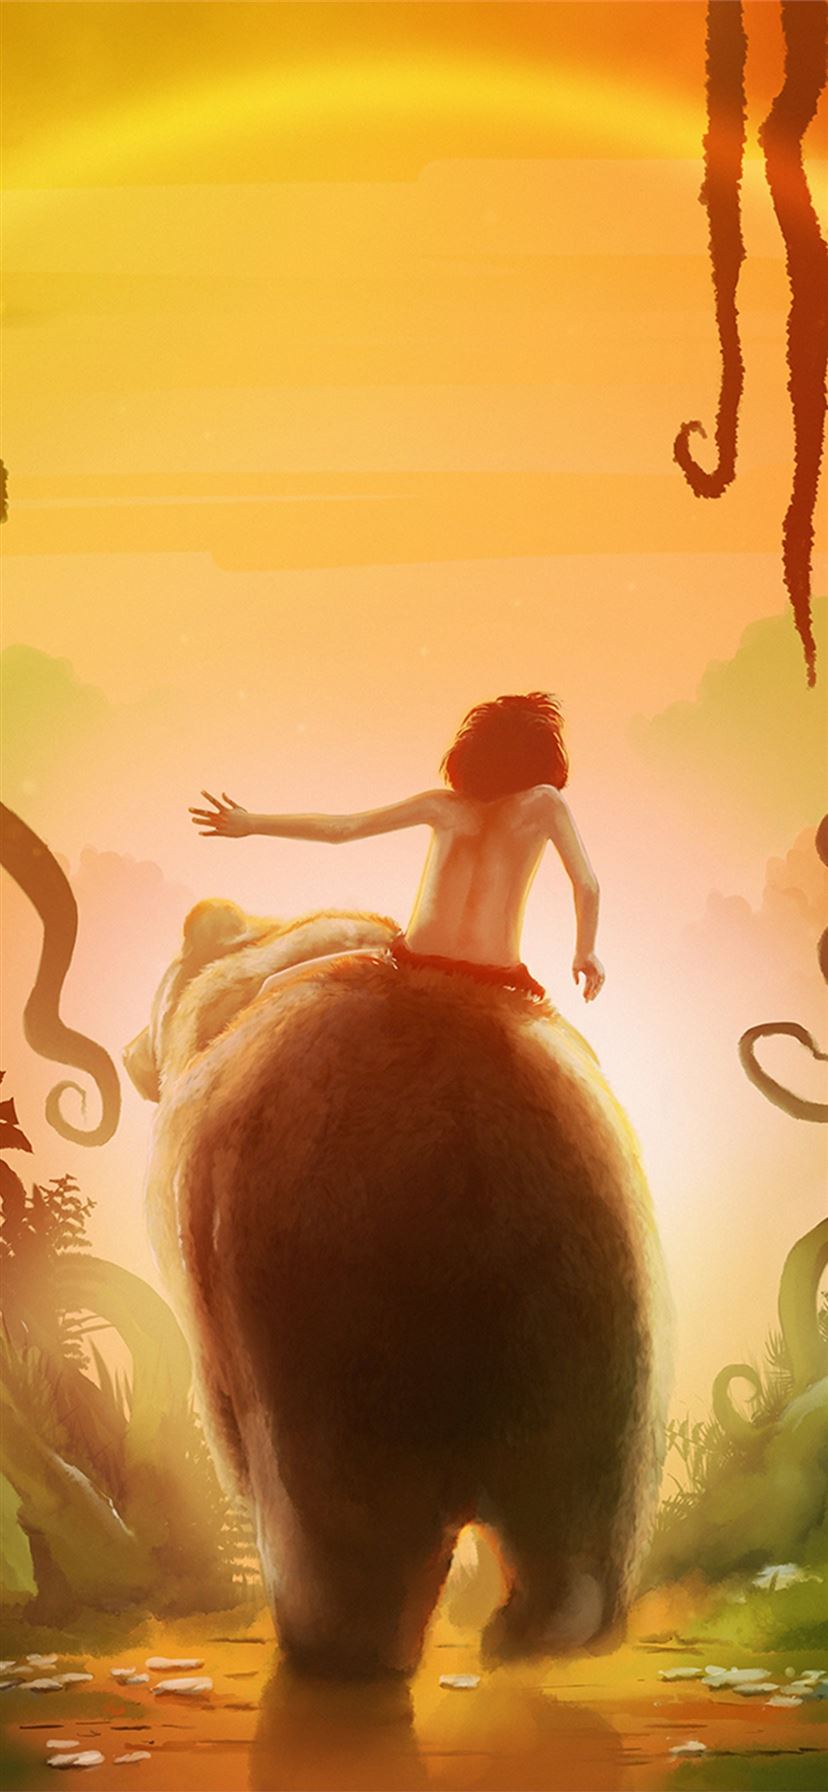 free The Jungle Book for iphone download